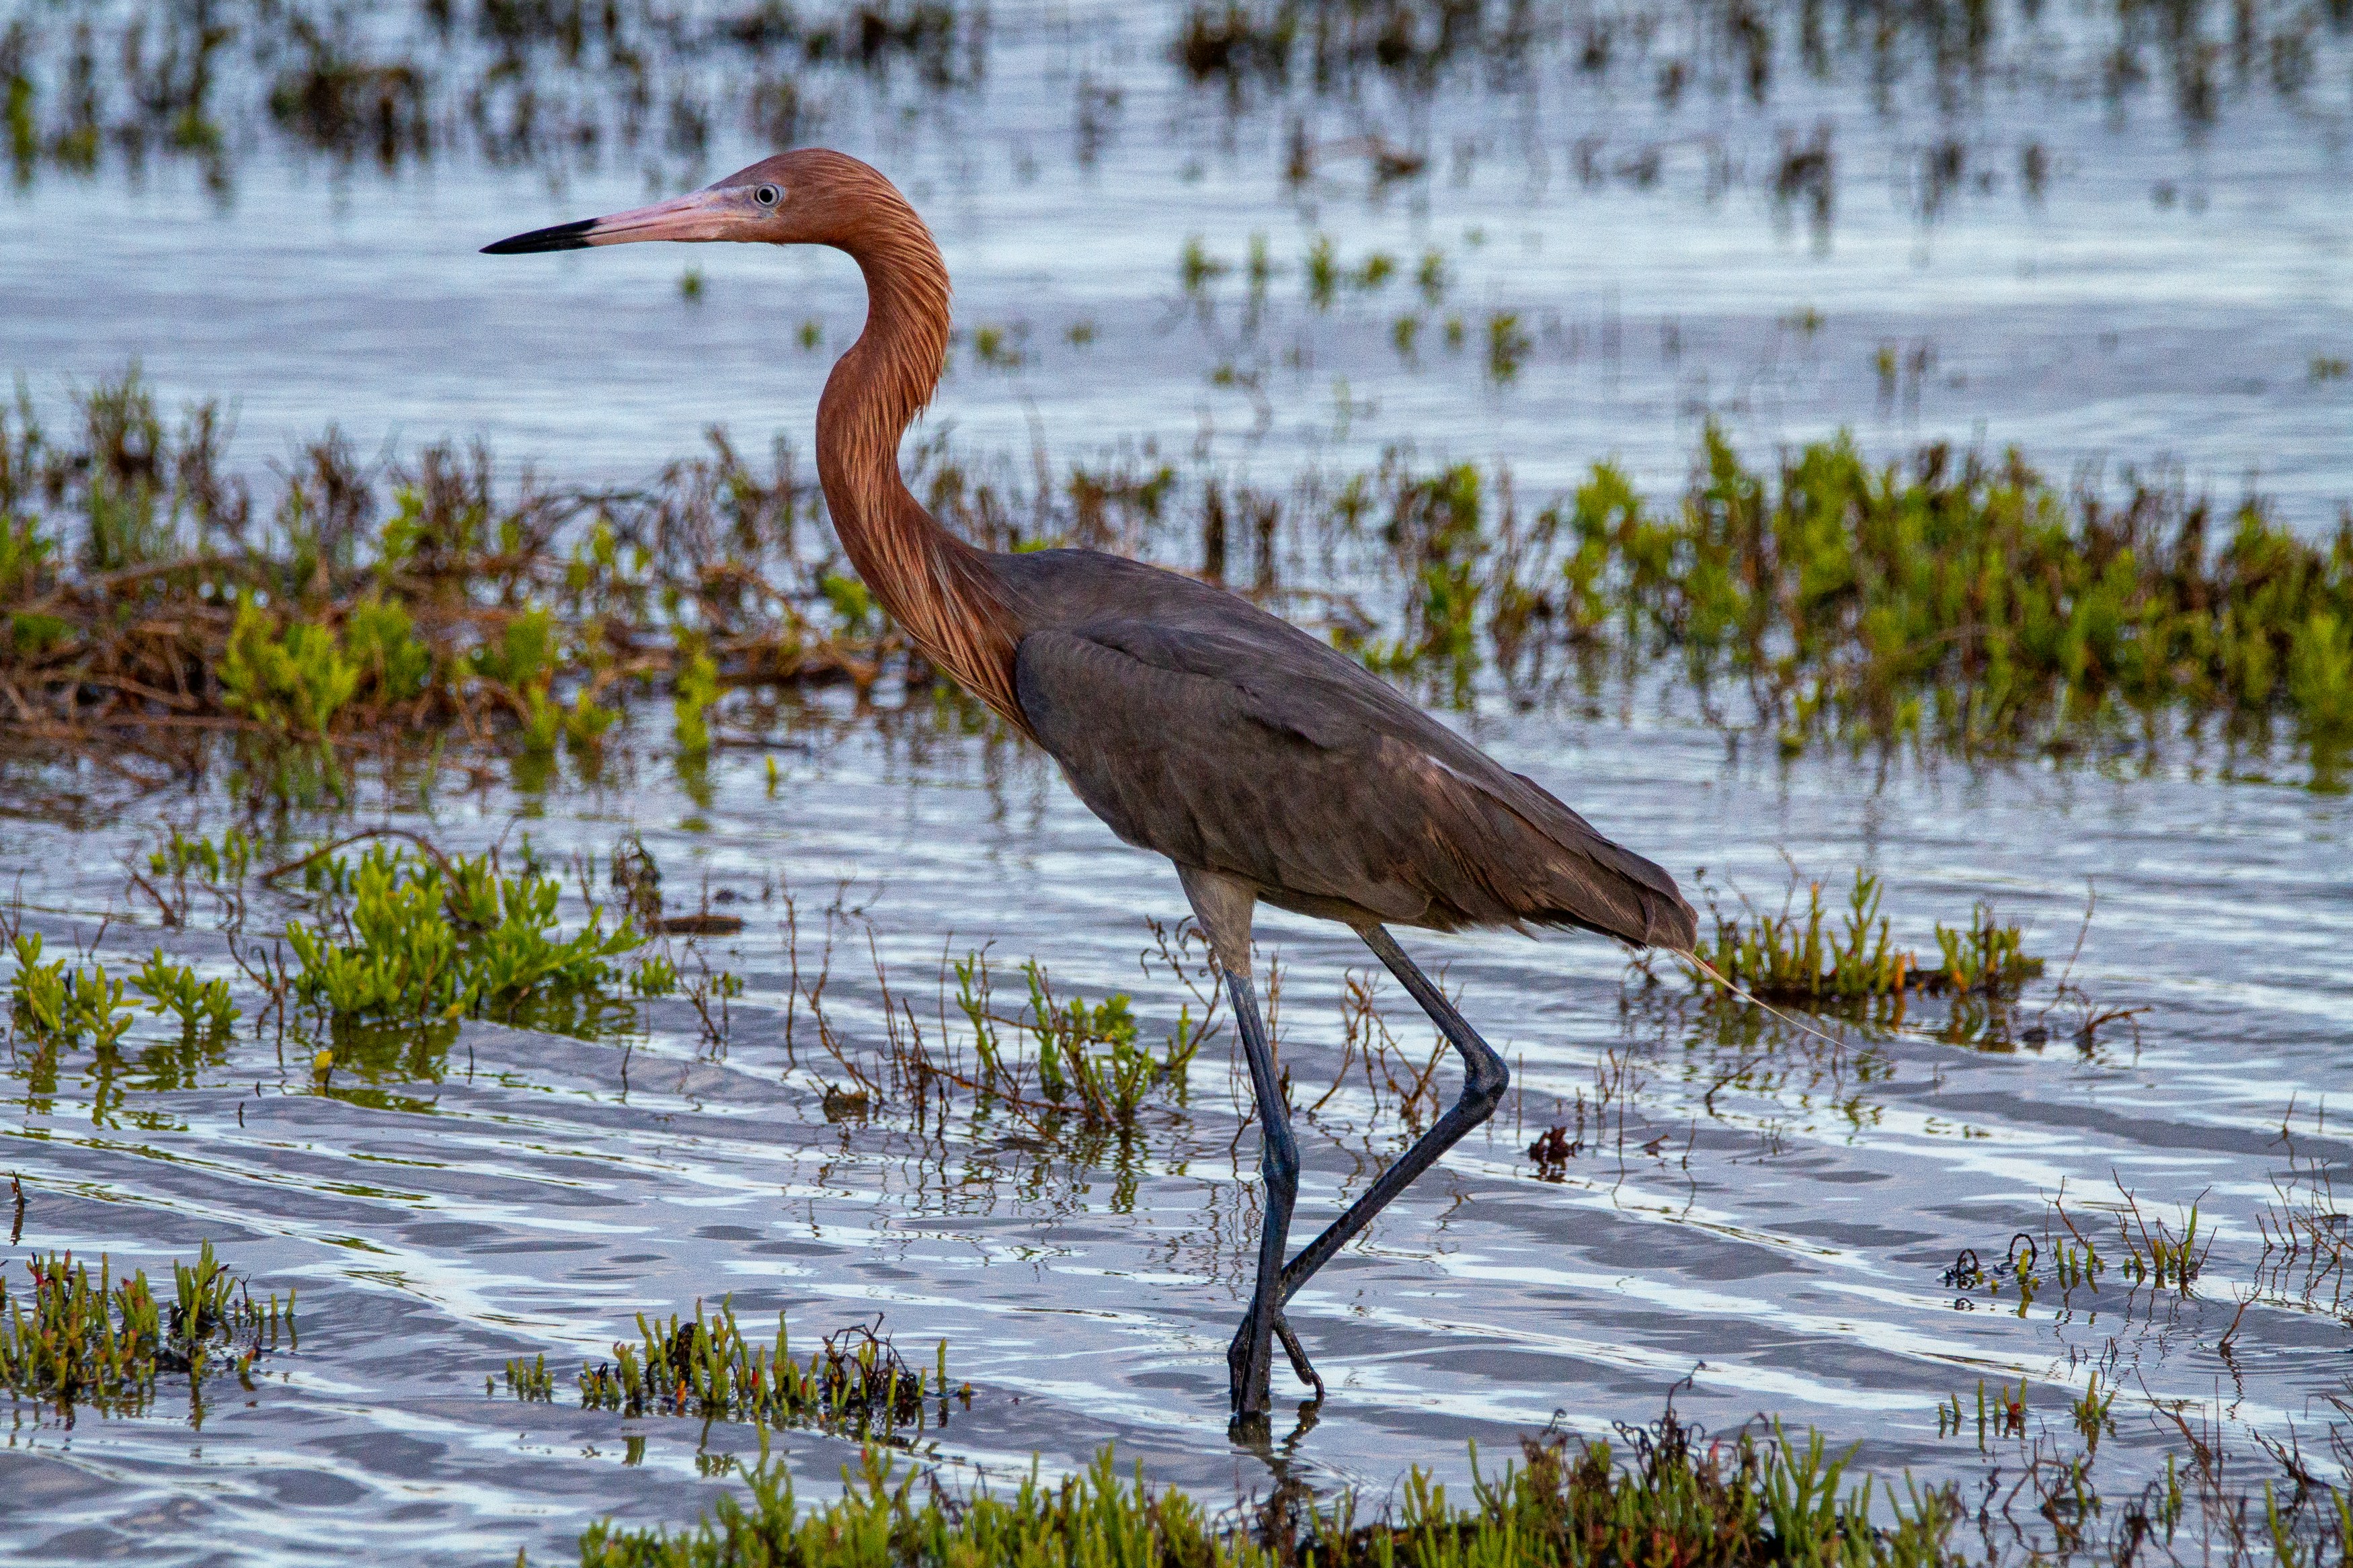 A reddish egret wades in the shallow water looking for food.